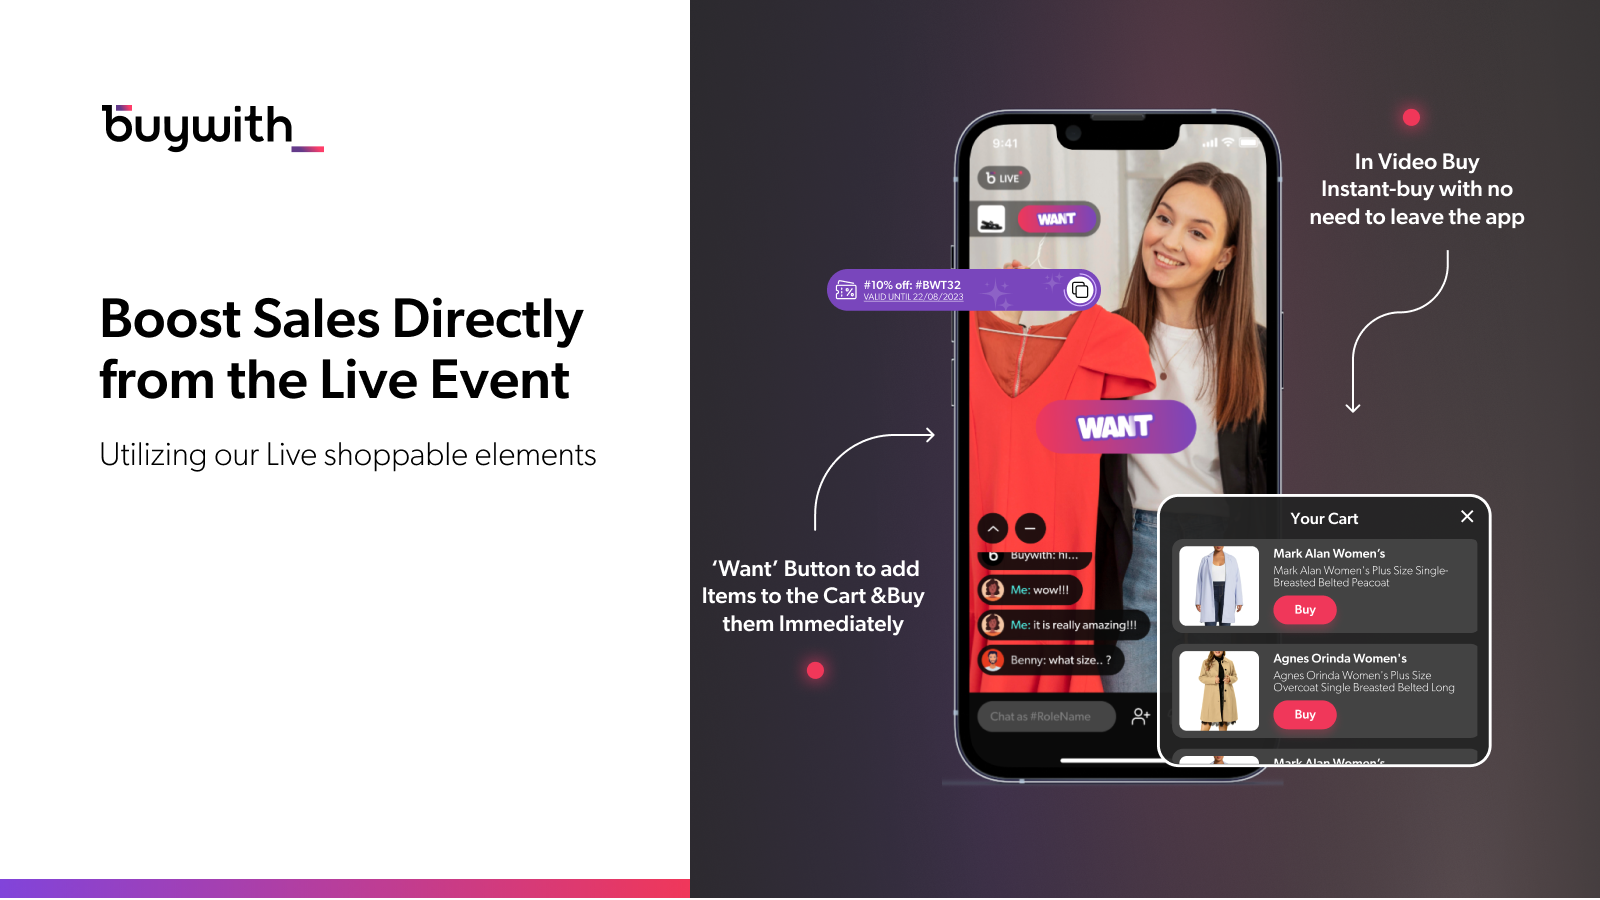 Boost Sales Directly from the Live Event